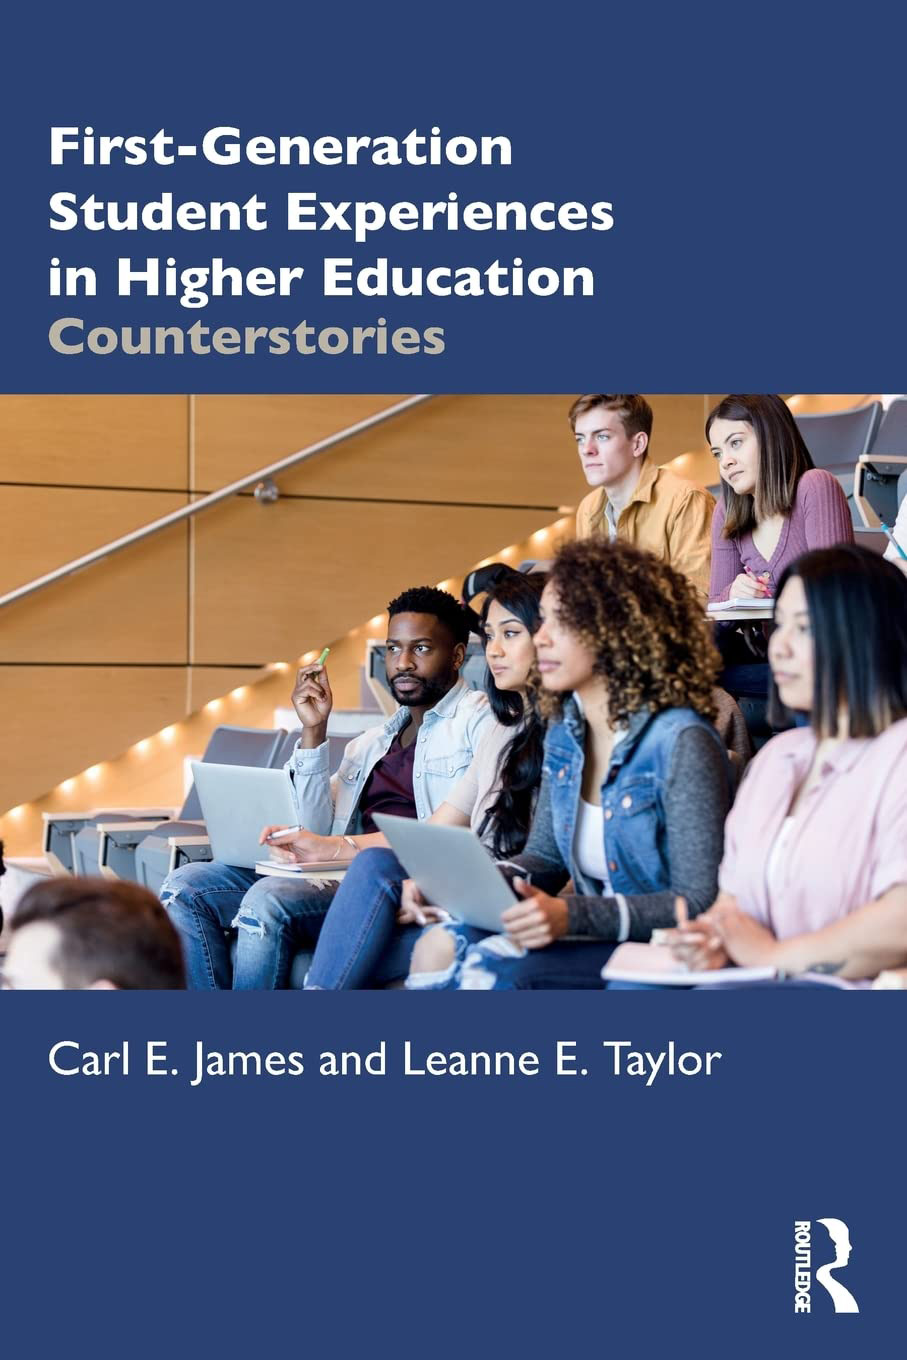 image of book cover for First-Generation Student Experiences in Higher Education